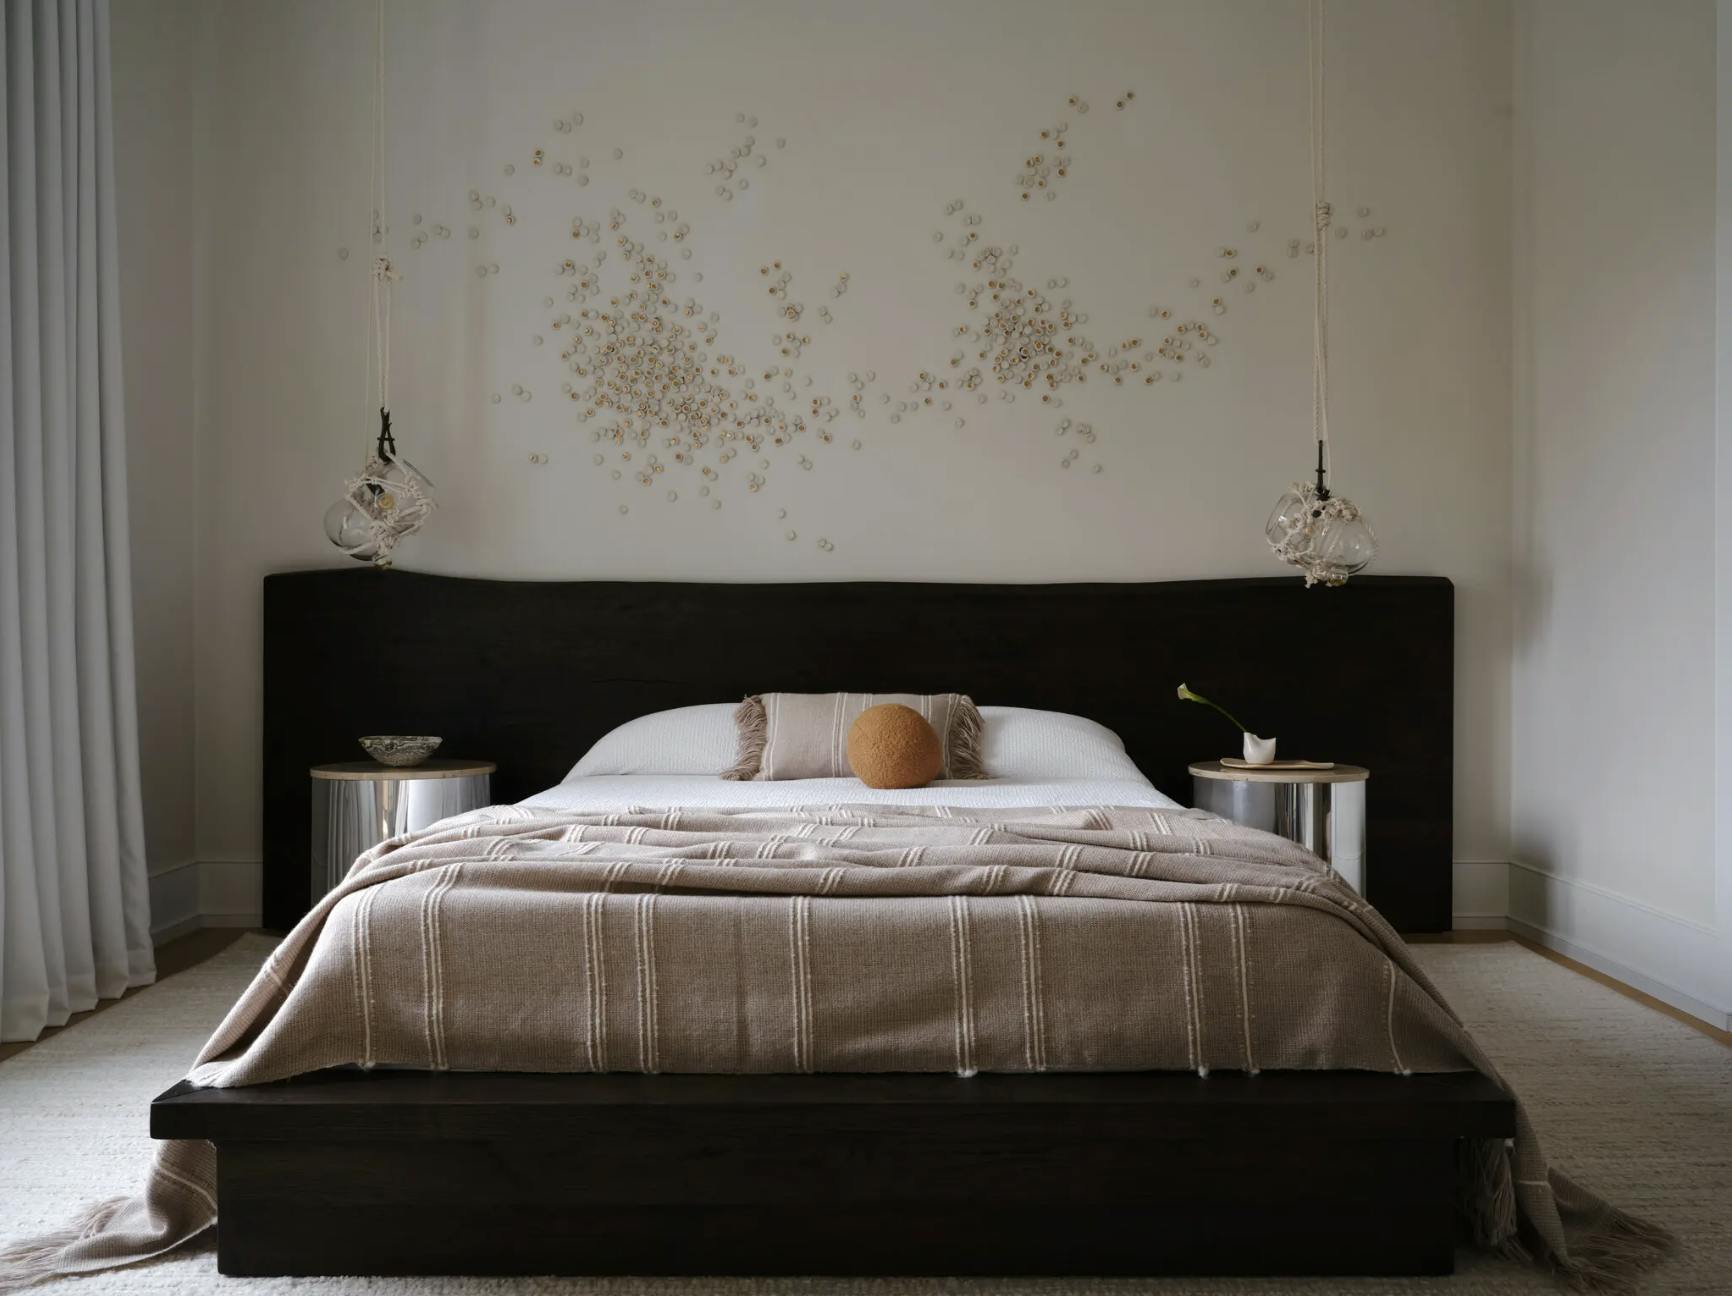 A custom installation by artist Christina Watka made from small pieces of mica positioned on a white wall above a bed with neutral sheets and a round orange pillow.